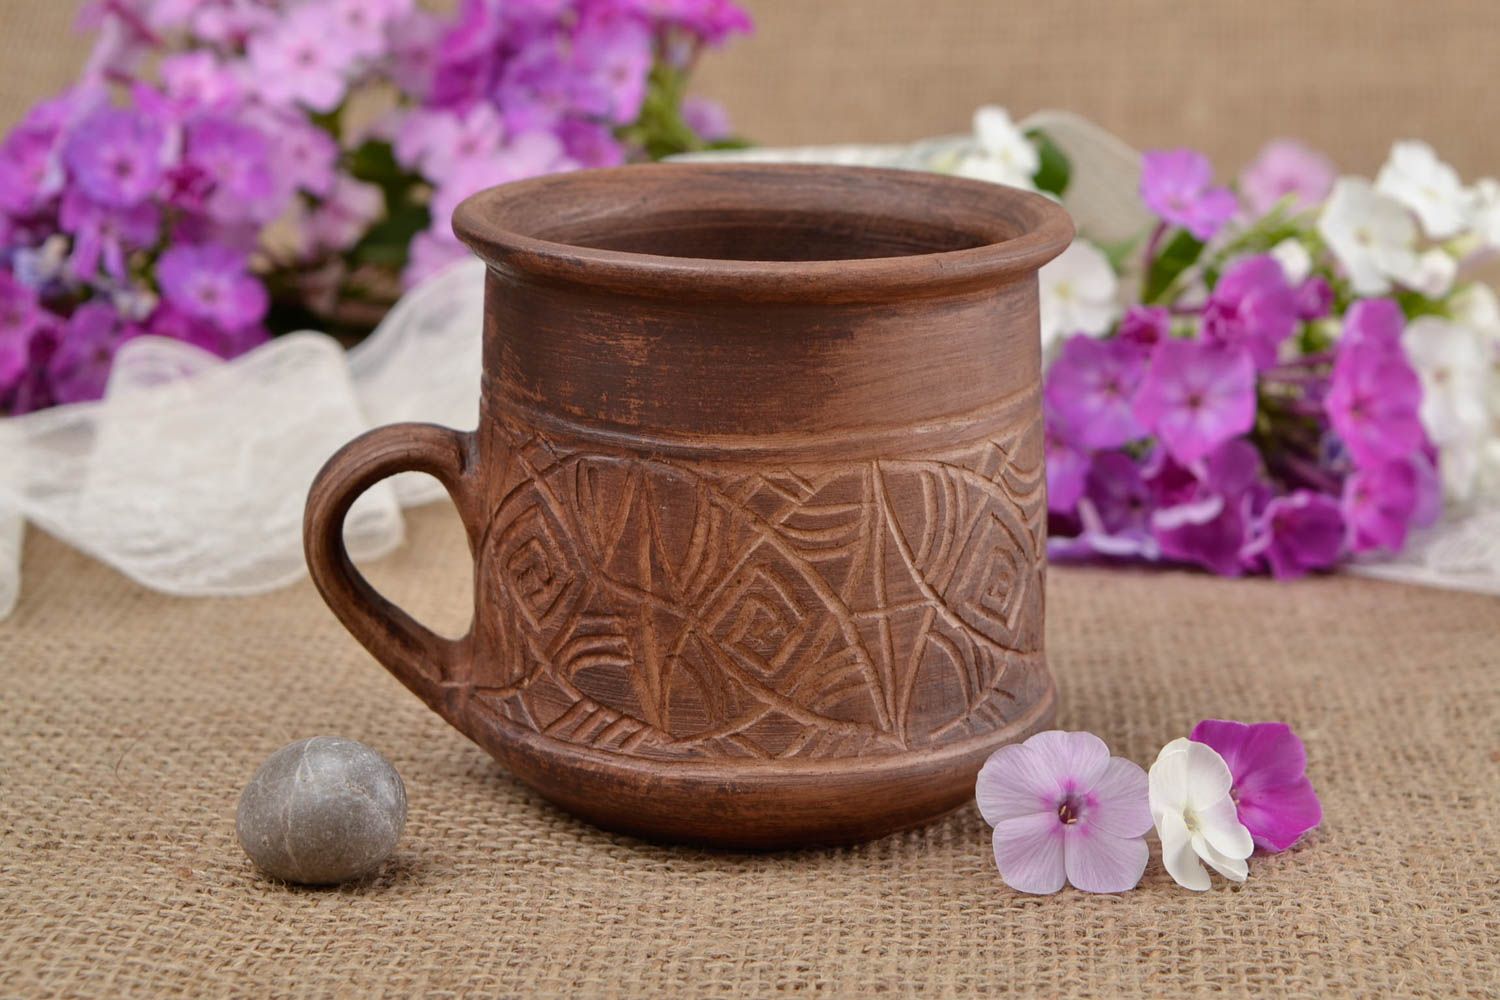 Handmade 8 oz teacup in brown color with handle and rustic pattern photo 1